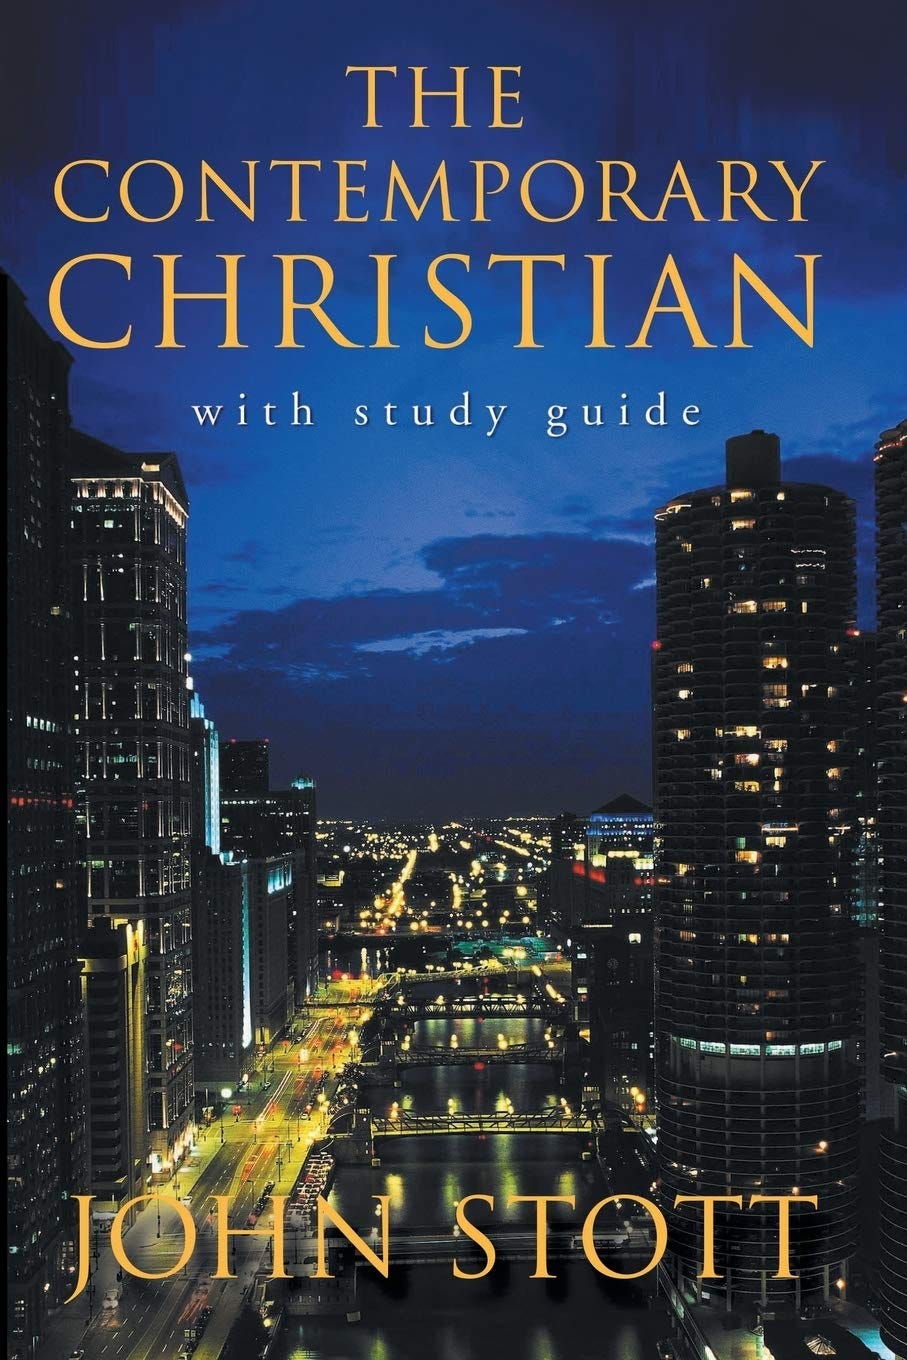 Image of book cover to The Contemporay Christian by John Stott.